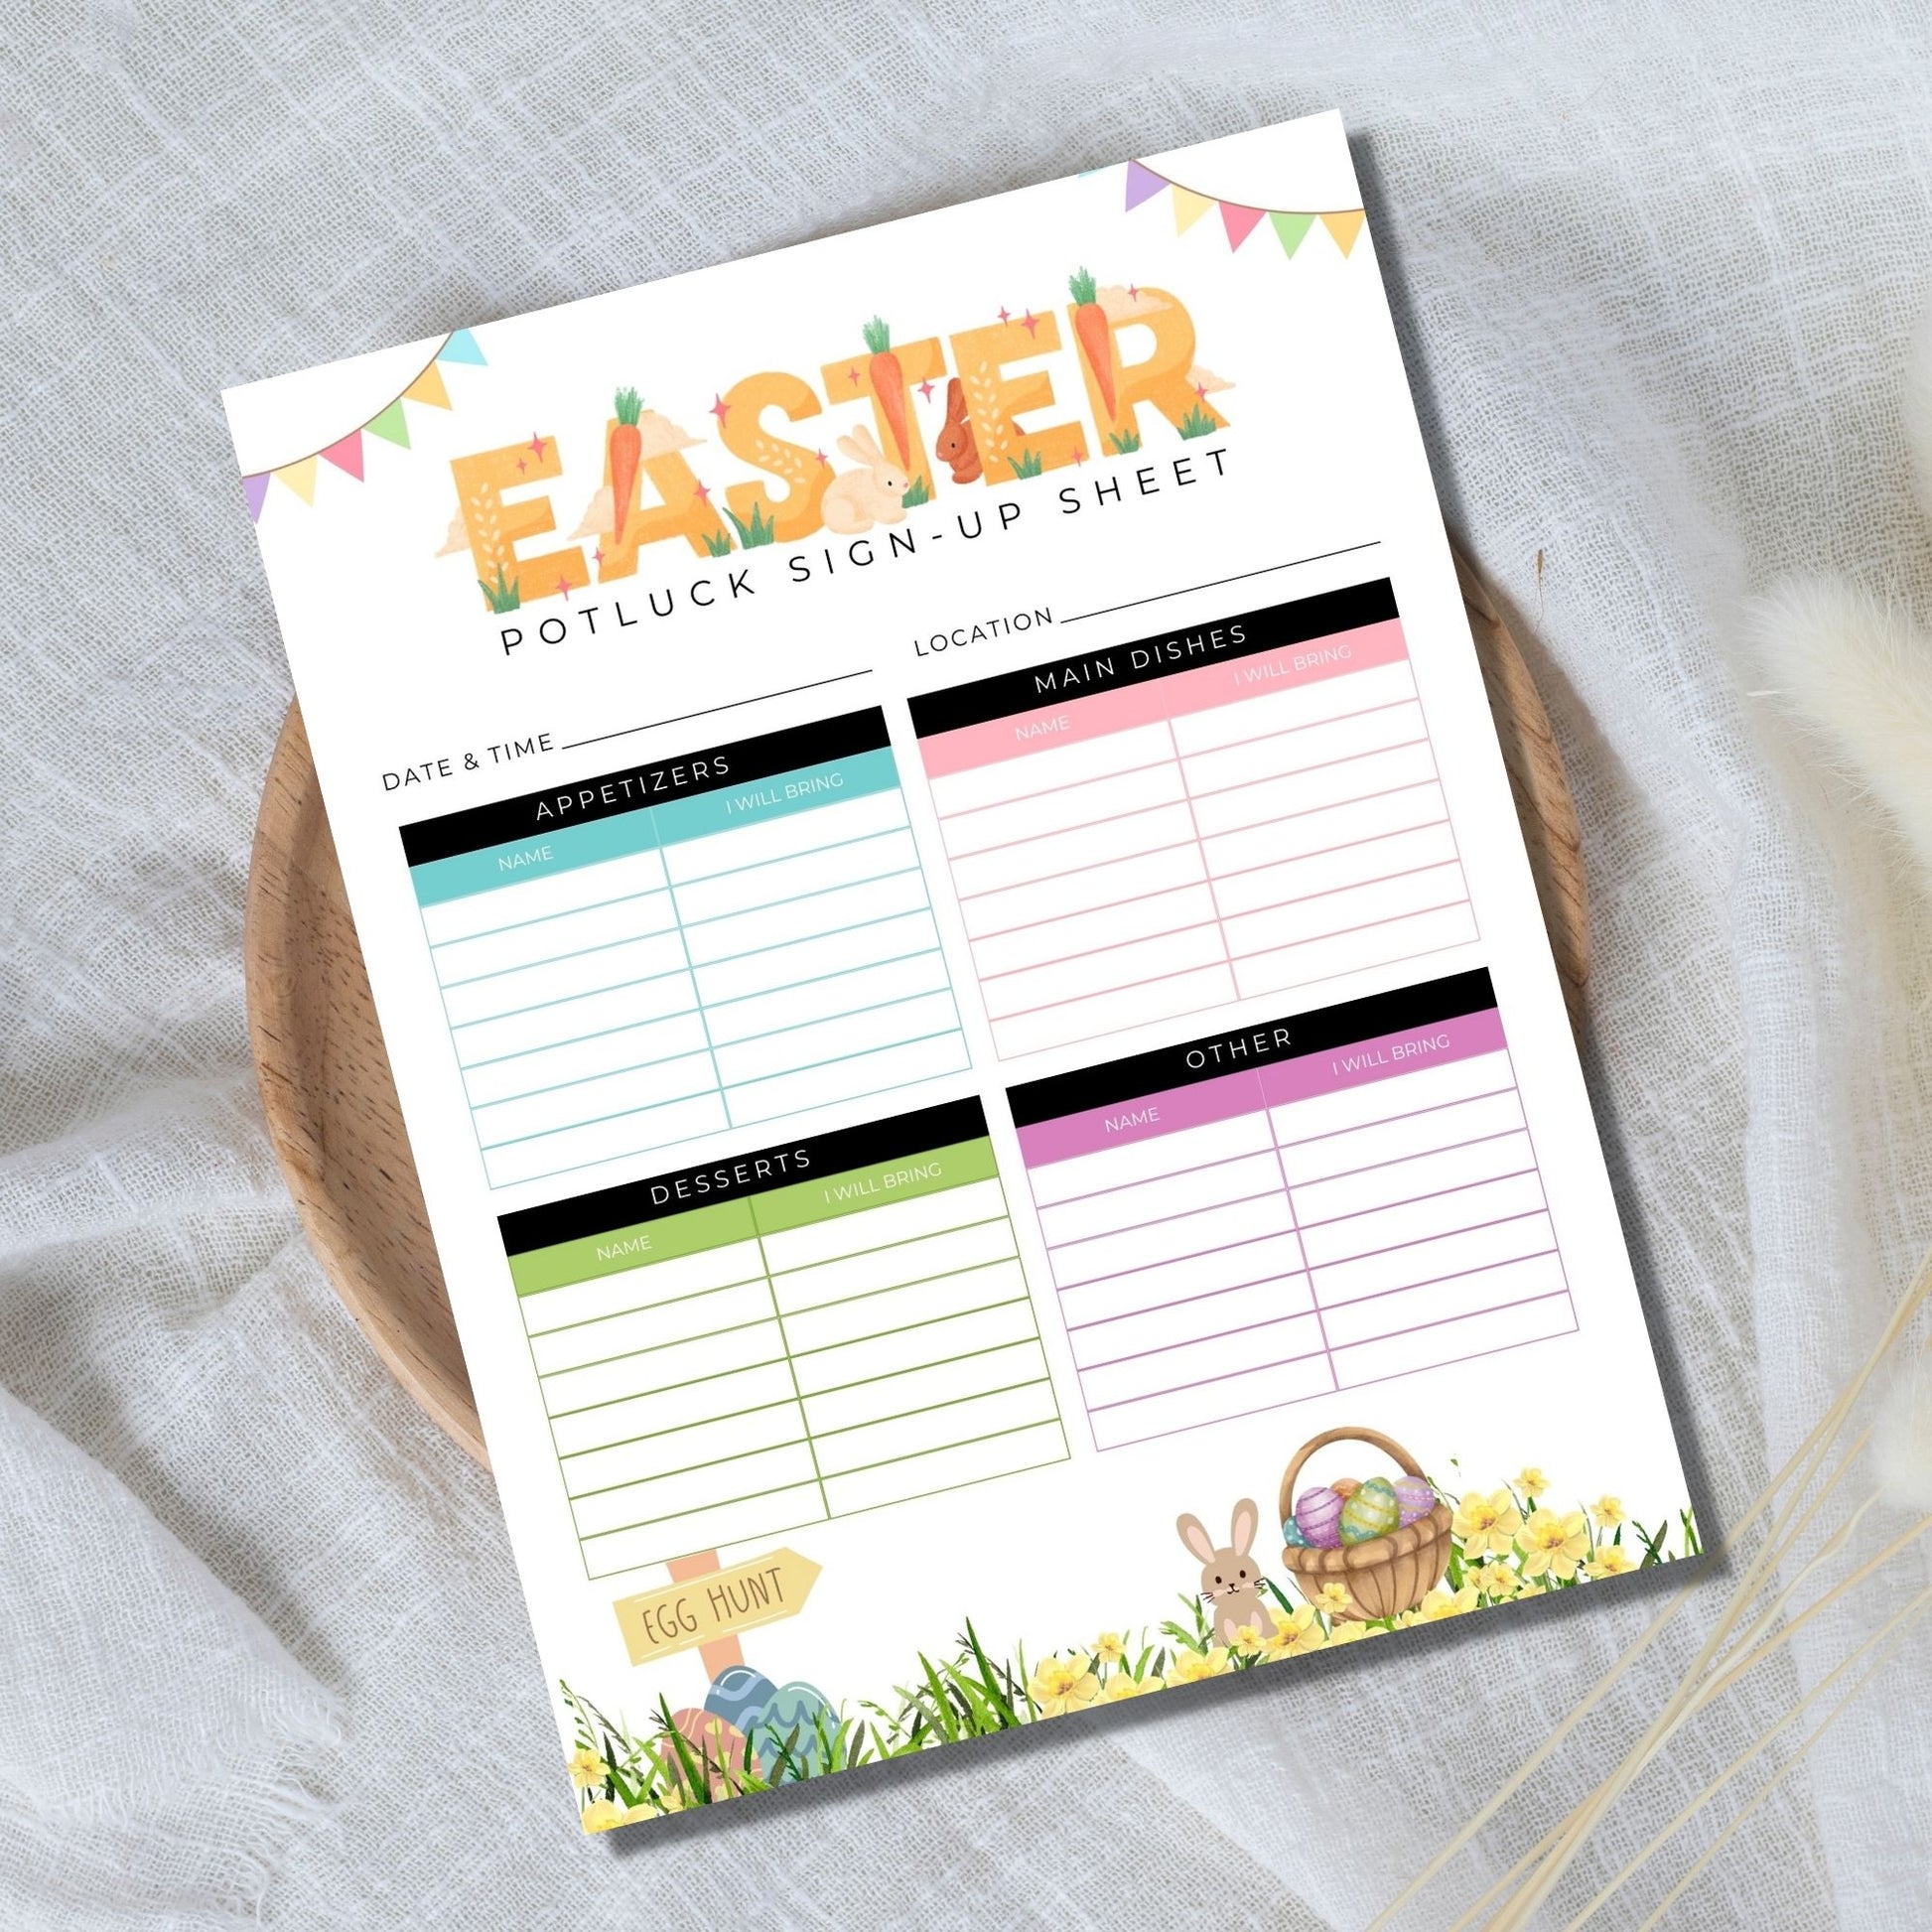 Easter Party Potluck Sign Up Sheet